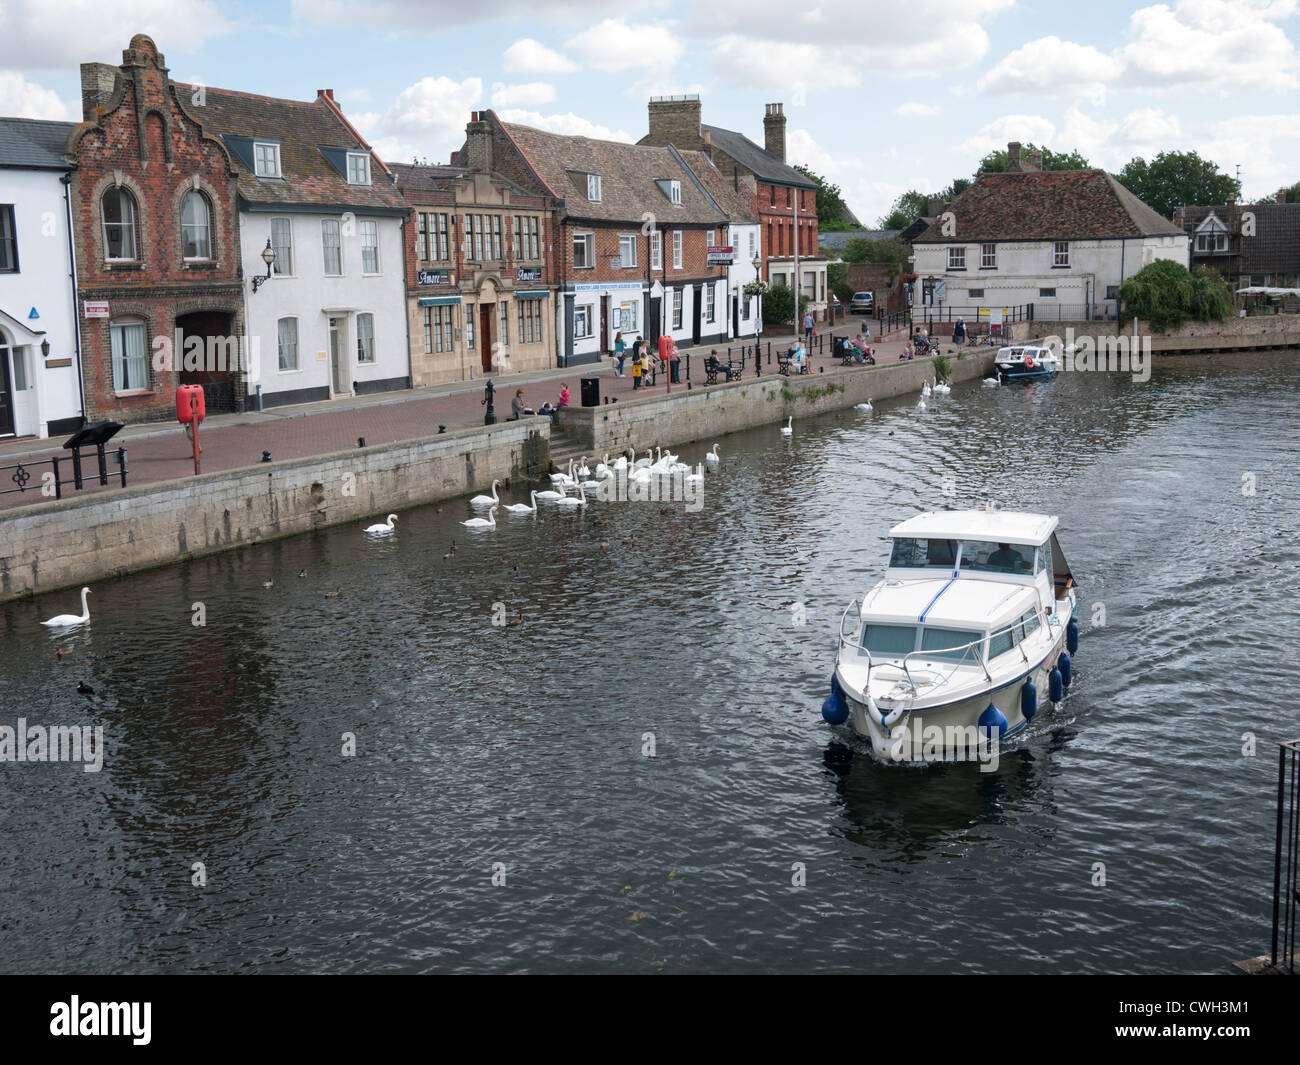 The River Great Ouse at St Ives Cambridgeshire UK showing the quayside and people enjoying the summer with a pleasure boat passi Stock Photo